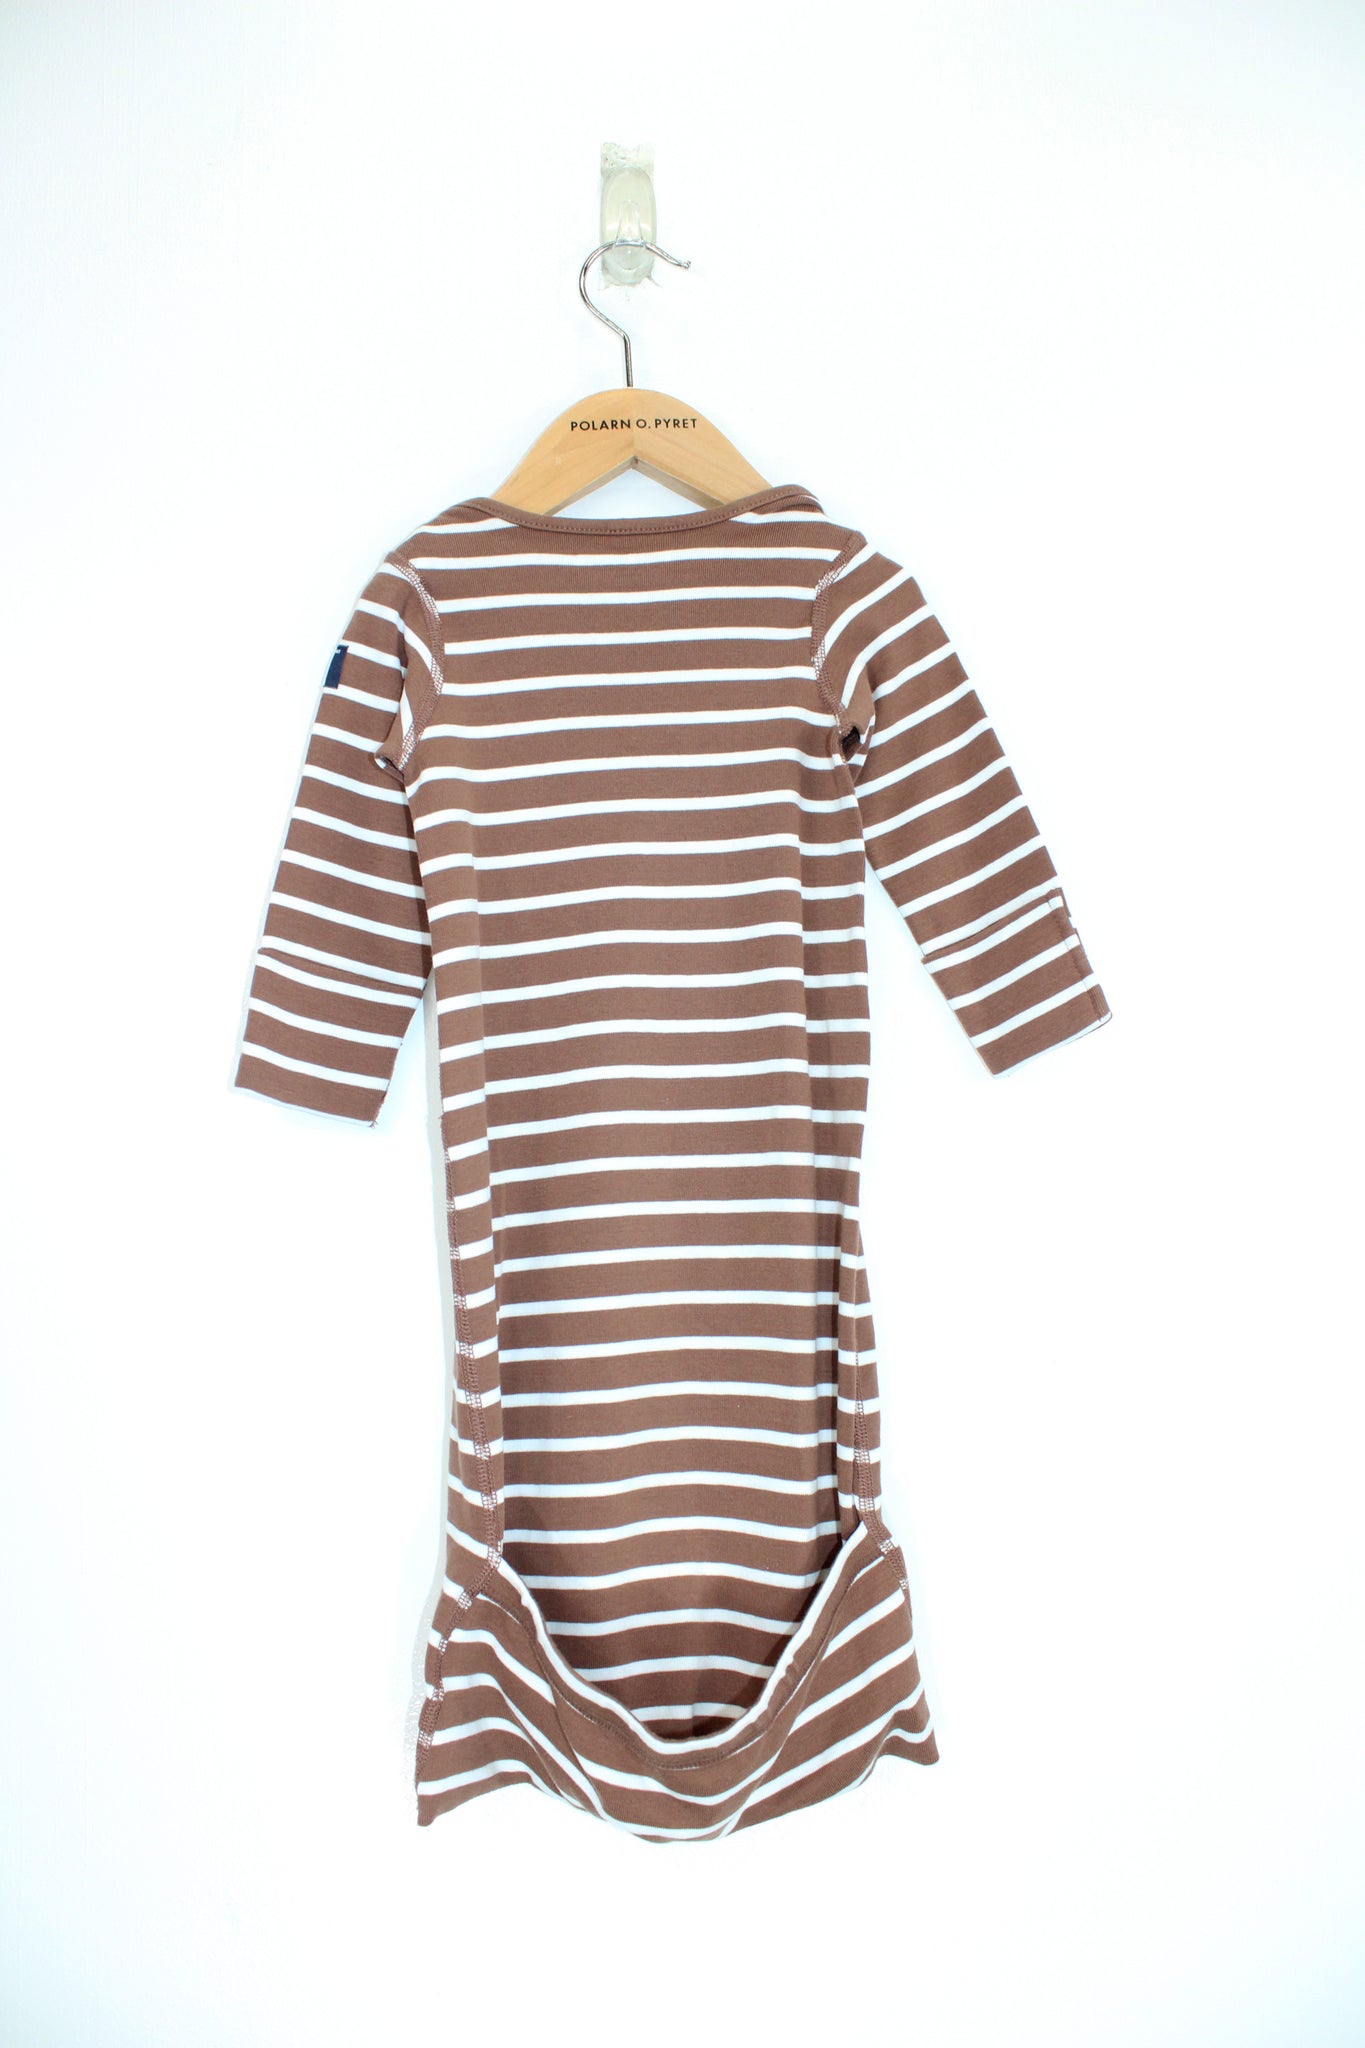 Striped Baby Sleeping Bag One Size / One Size